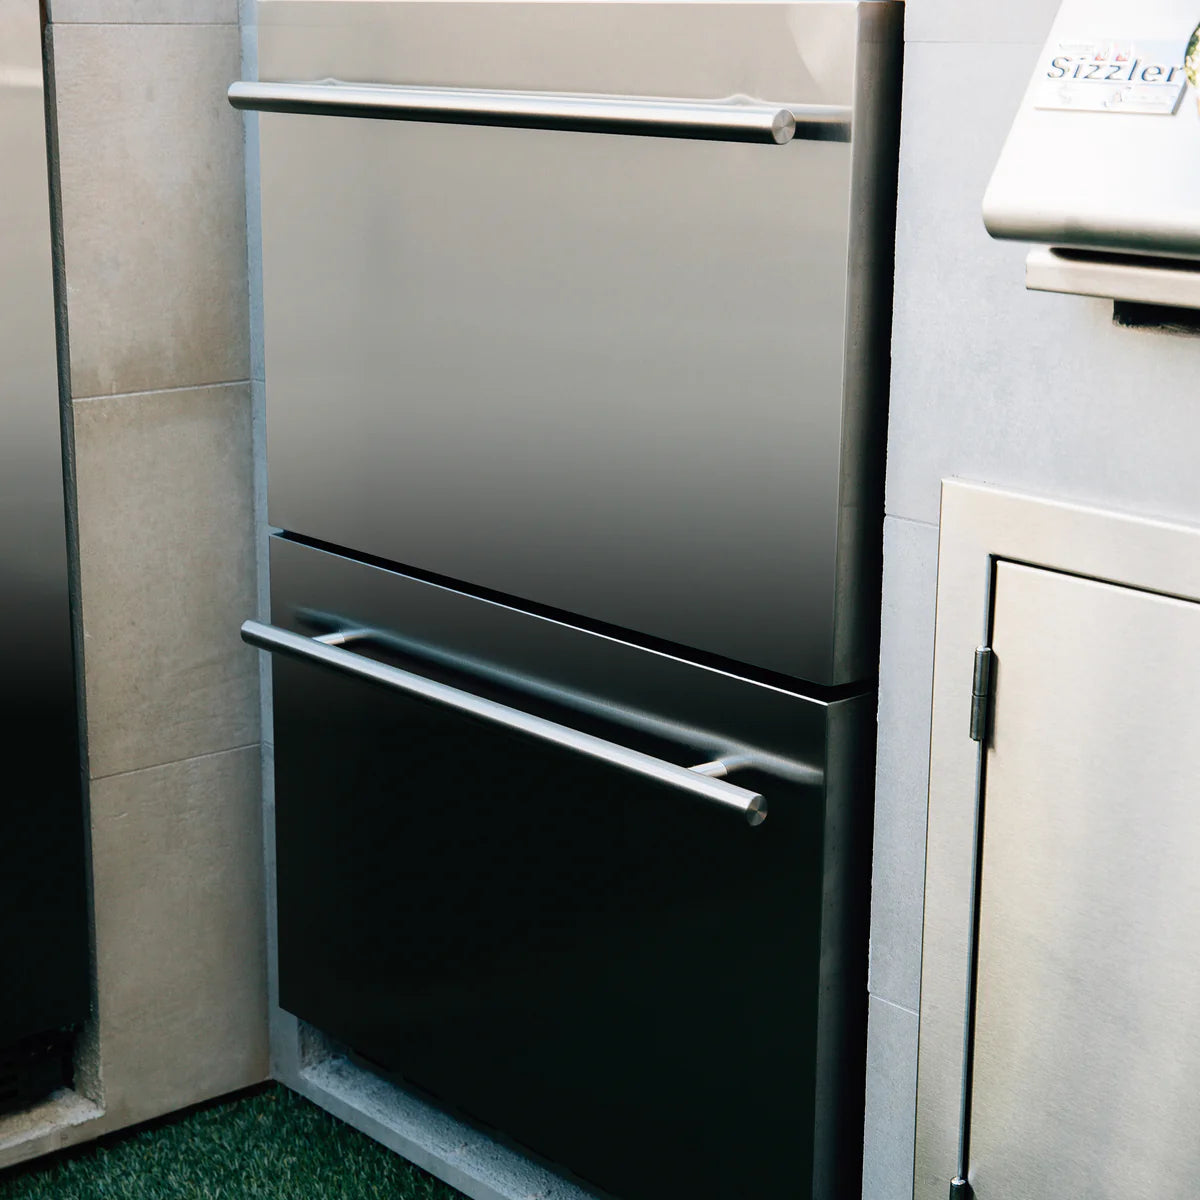 Deluxe Outdoor Rated 2-Drawer Refrigerator - 24" 5.3c